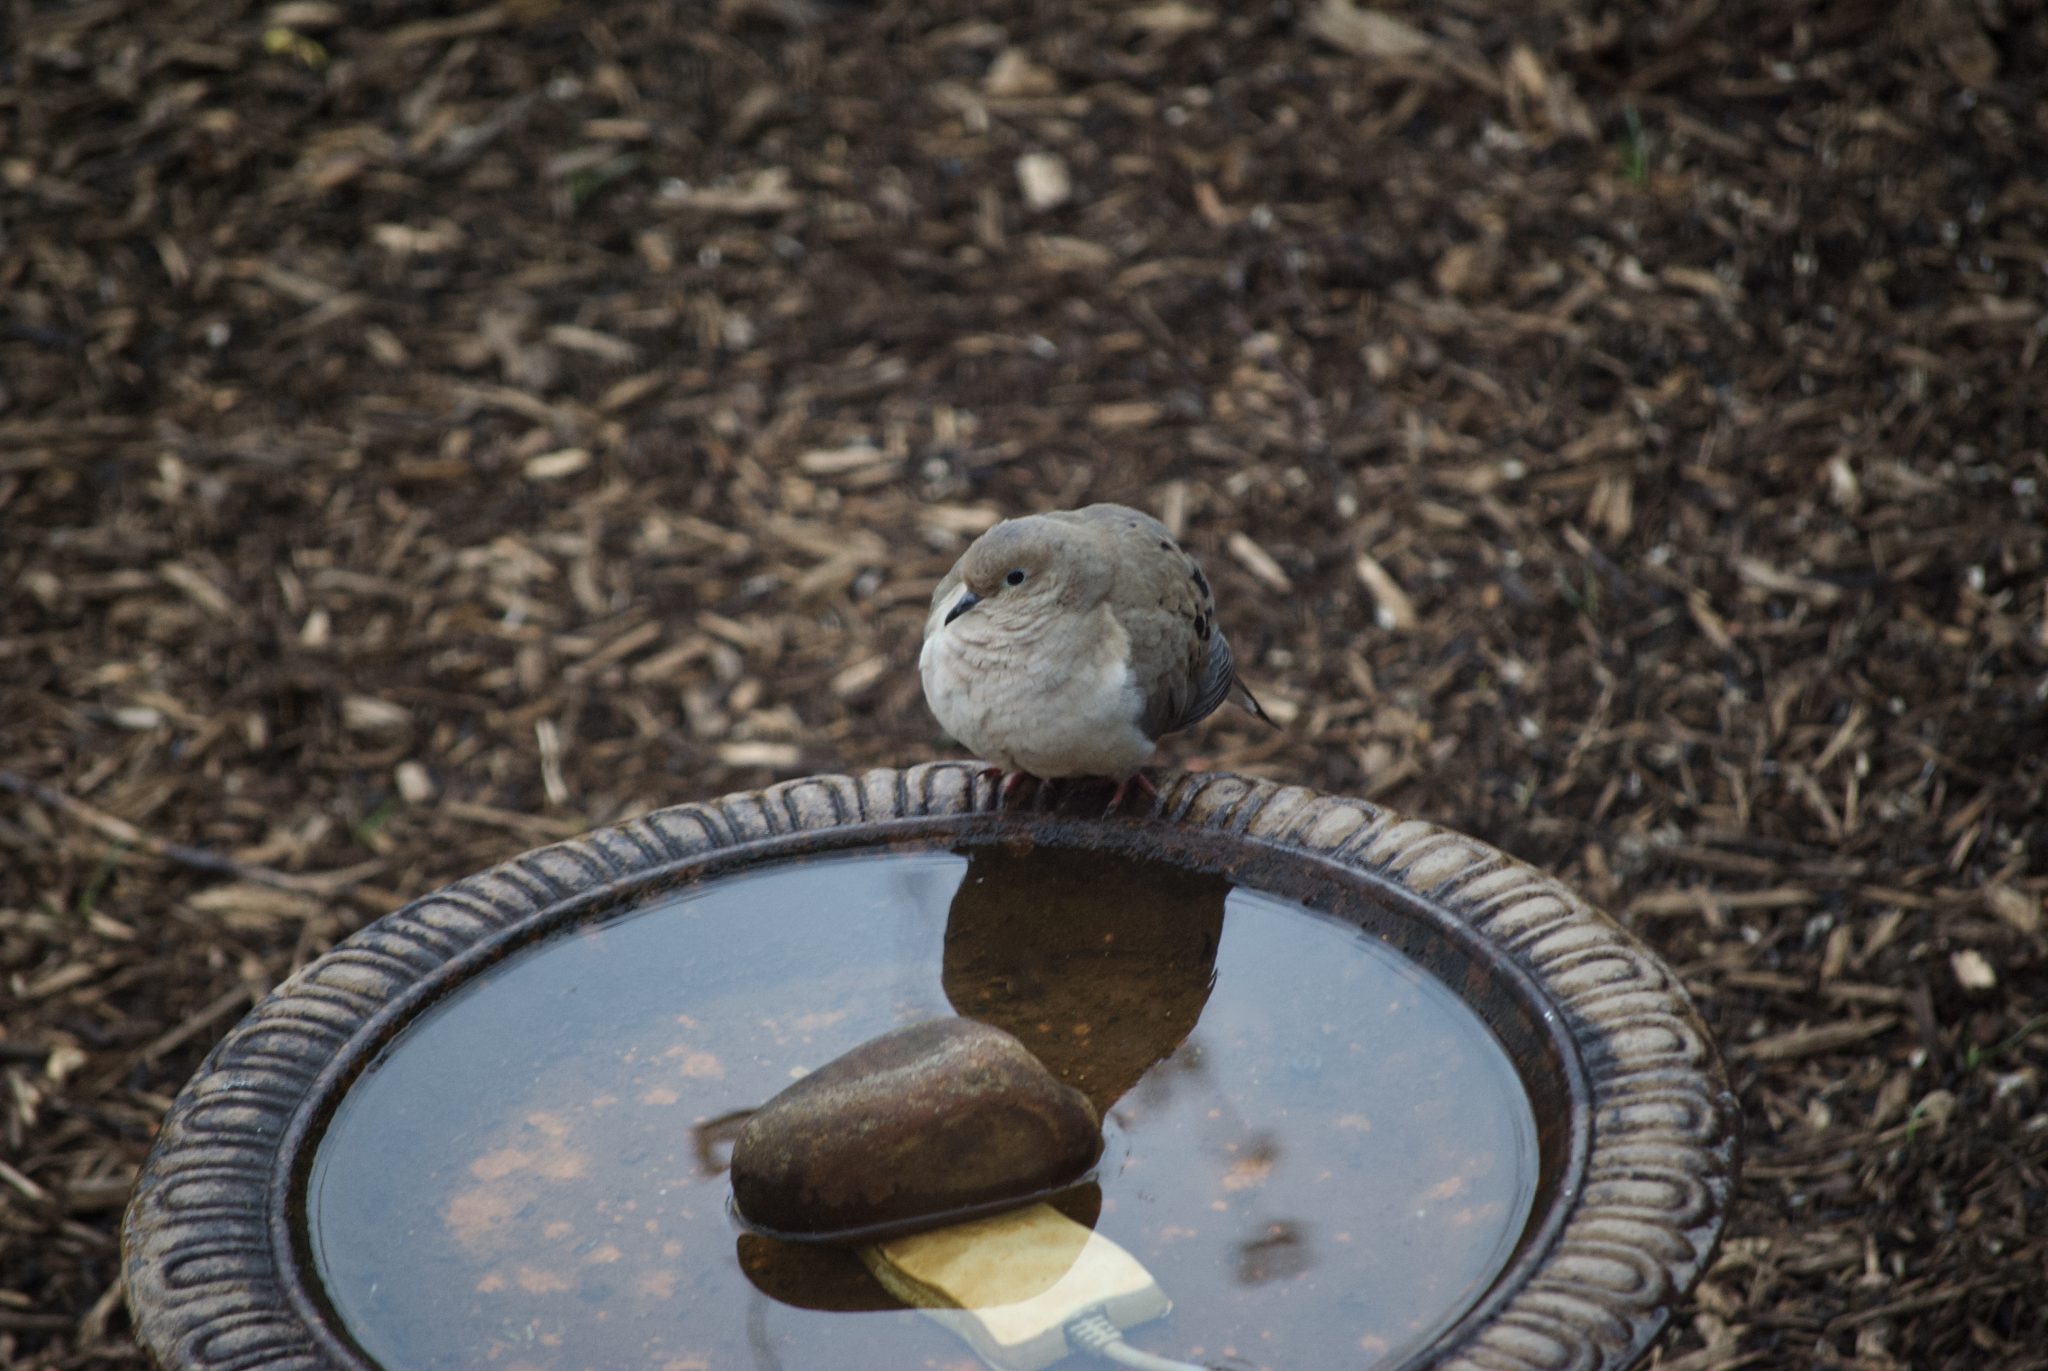 A mourning dove drinks from a birdbath with a heater in it